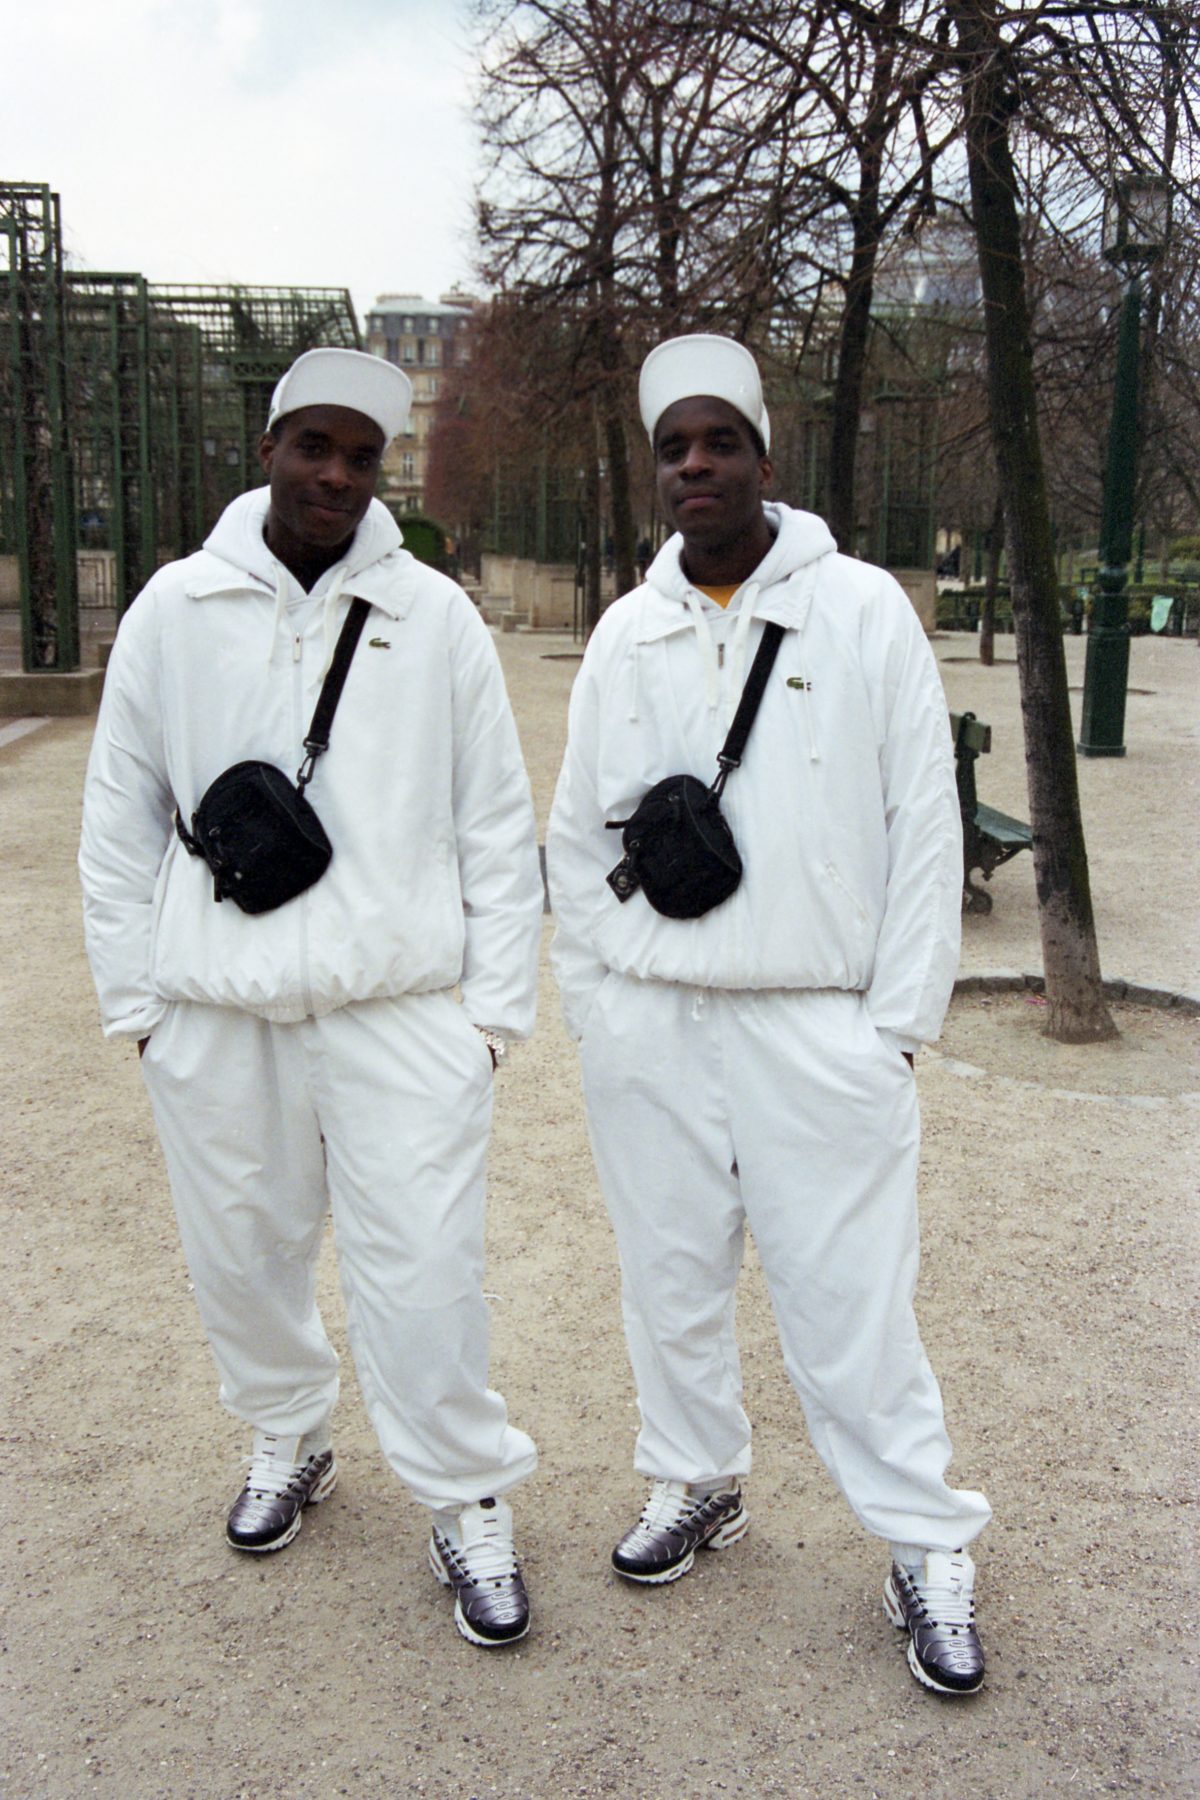 Street Photography, Paris, Les Halles, Streetwear, Mohamed Bourouissa, Twins in white suits in Paris, Exhibition at The Gallery at VCUarts Qatar